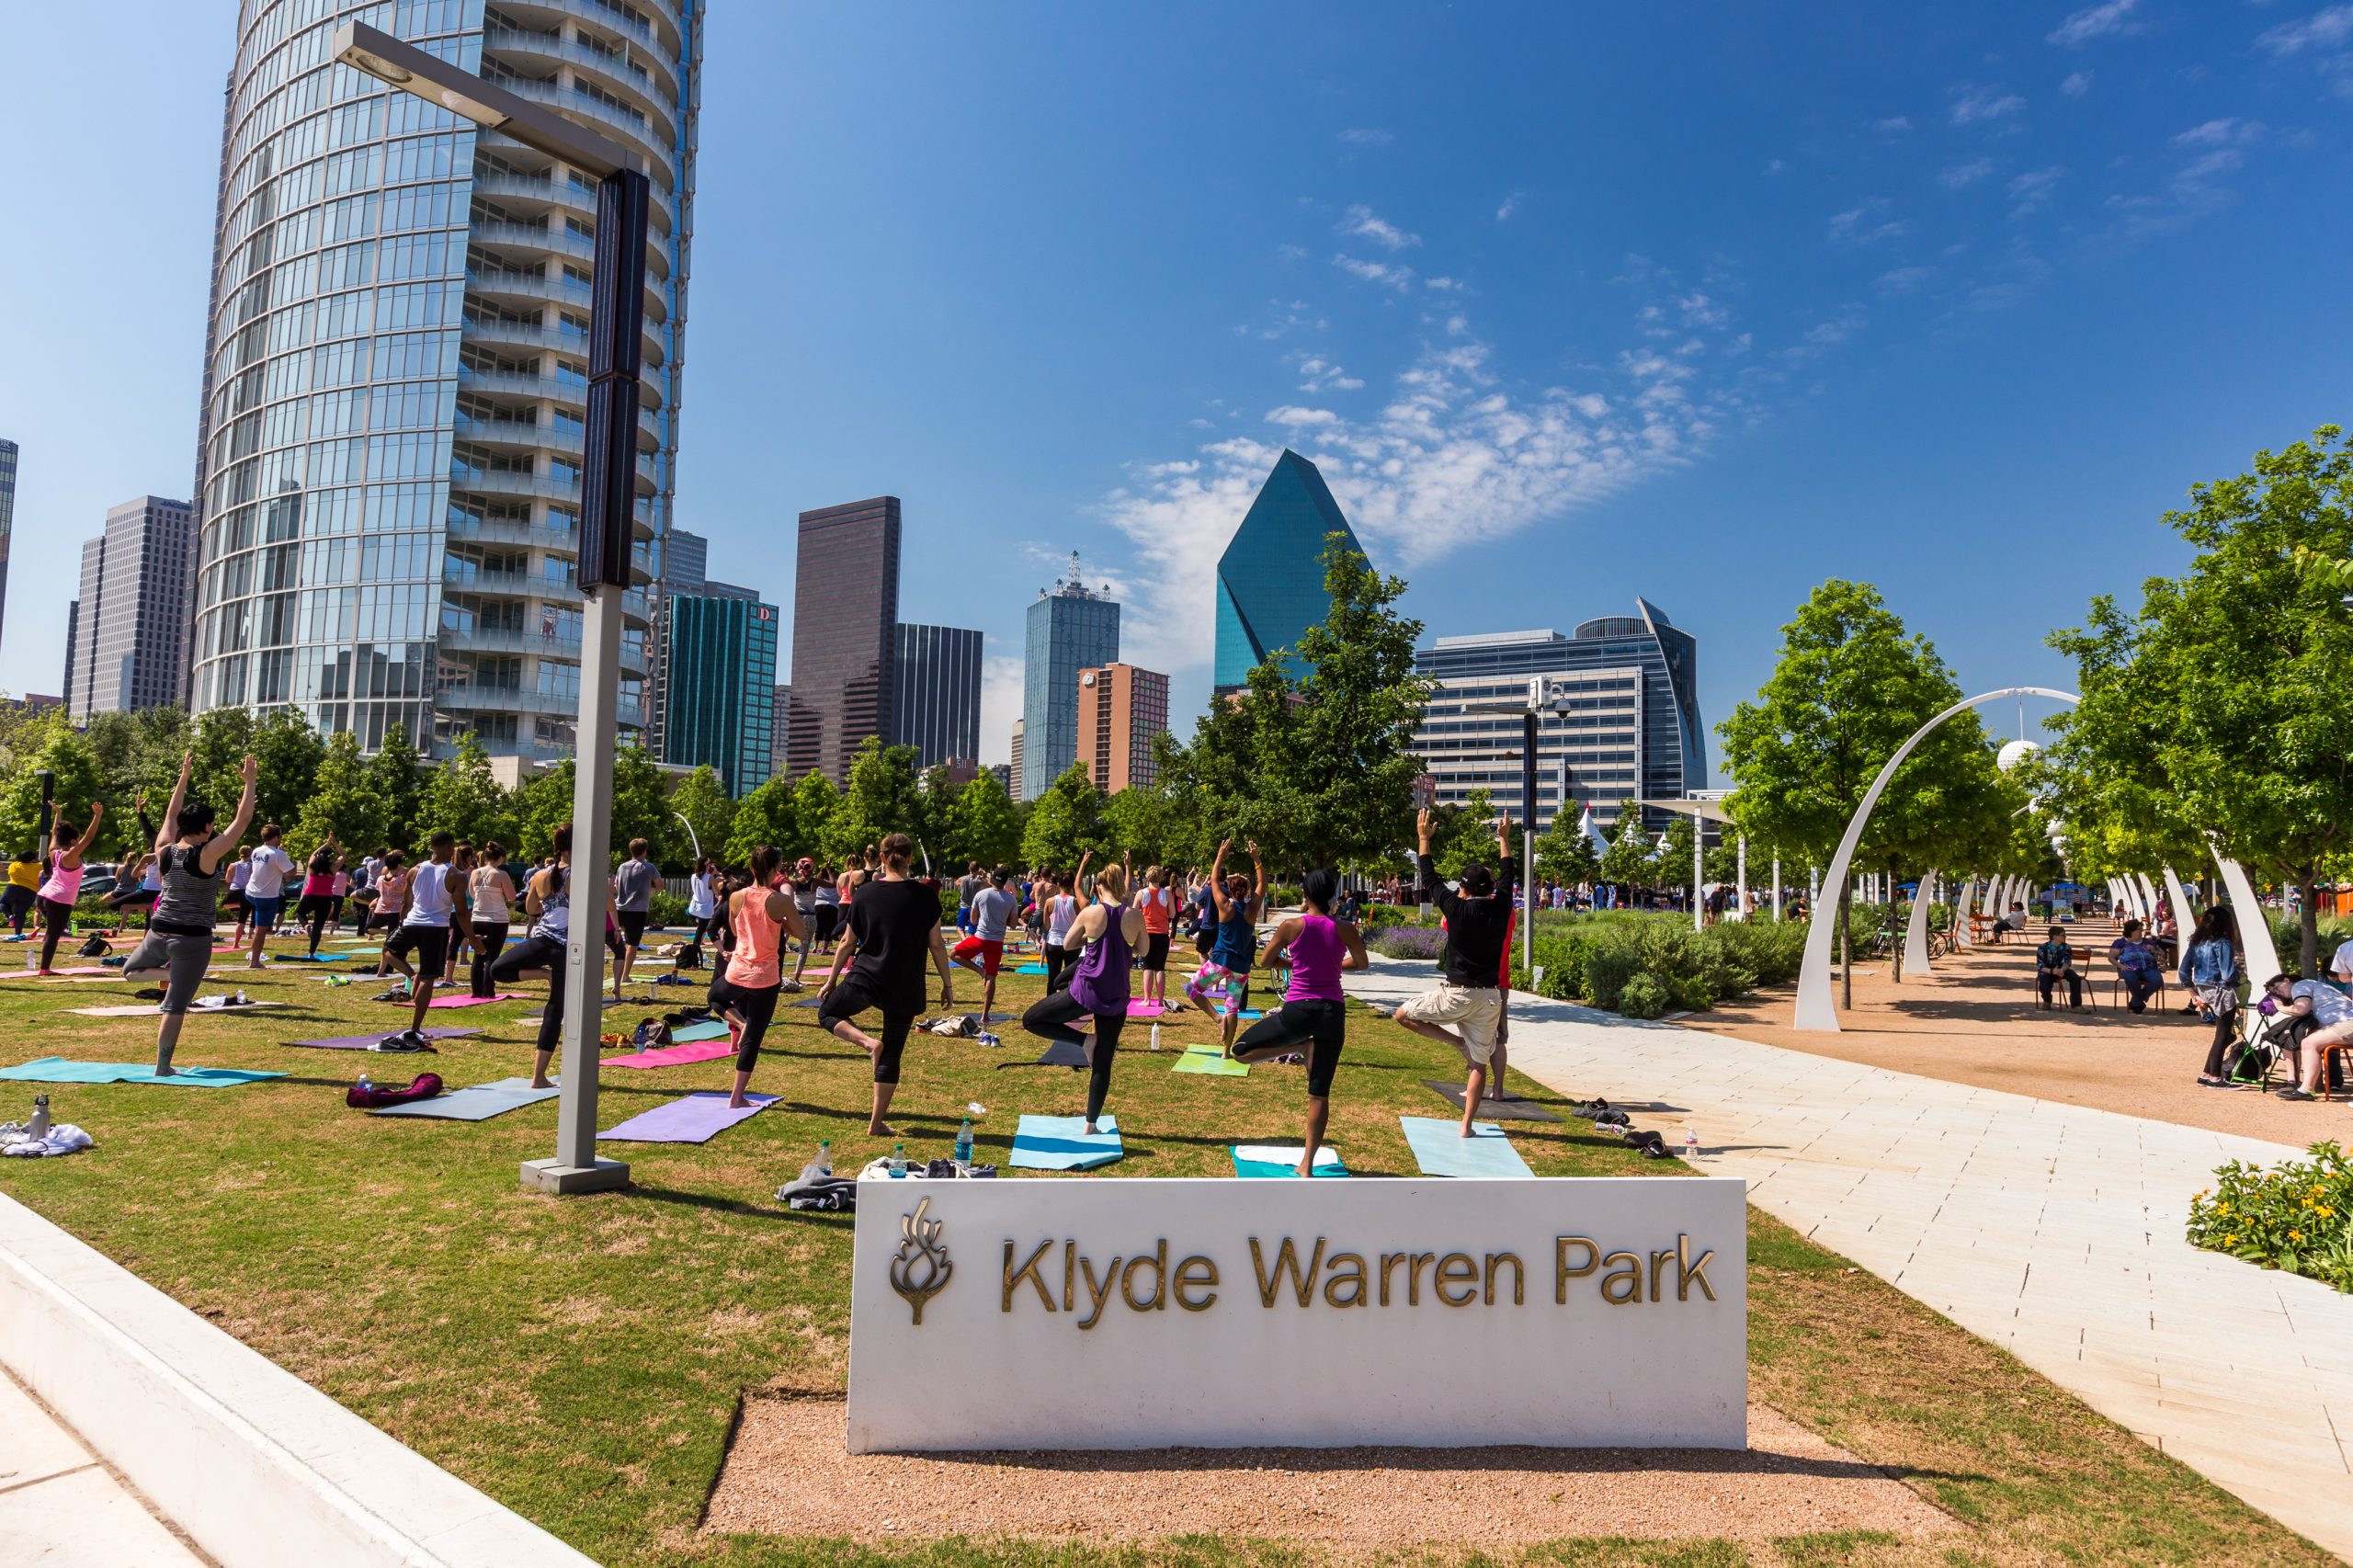 Spend Your Time At Klyde Warren Park